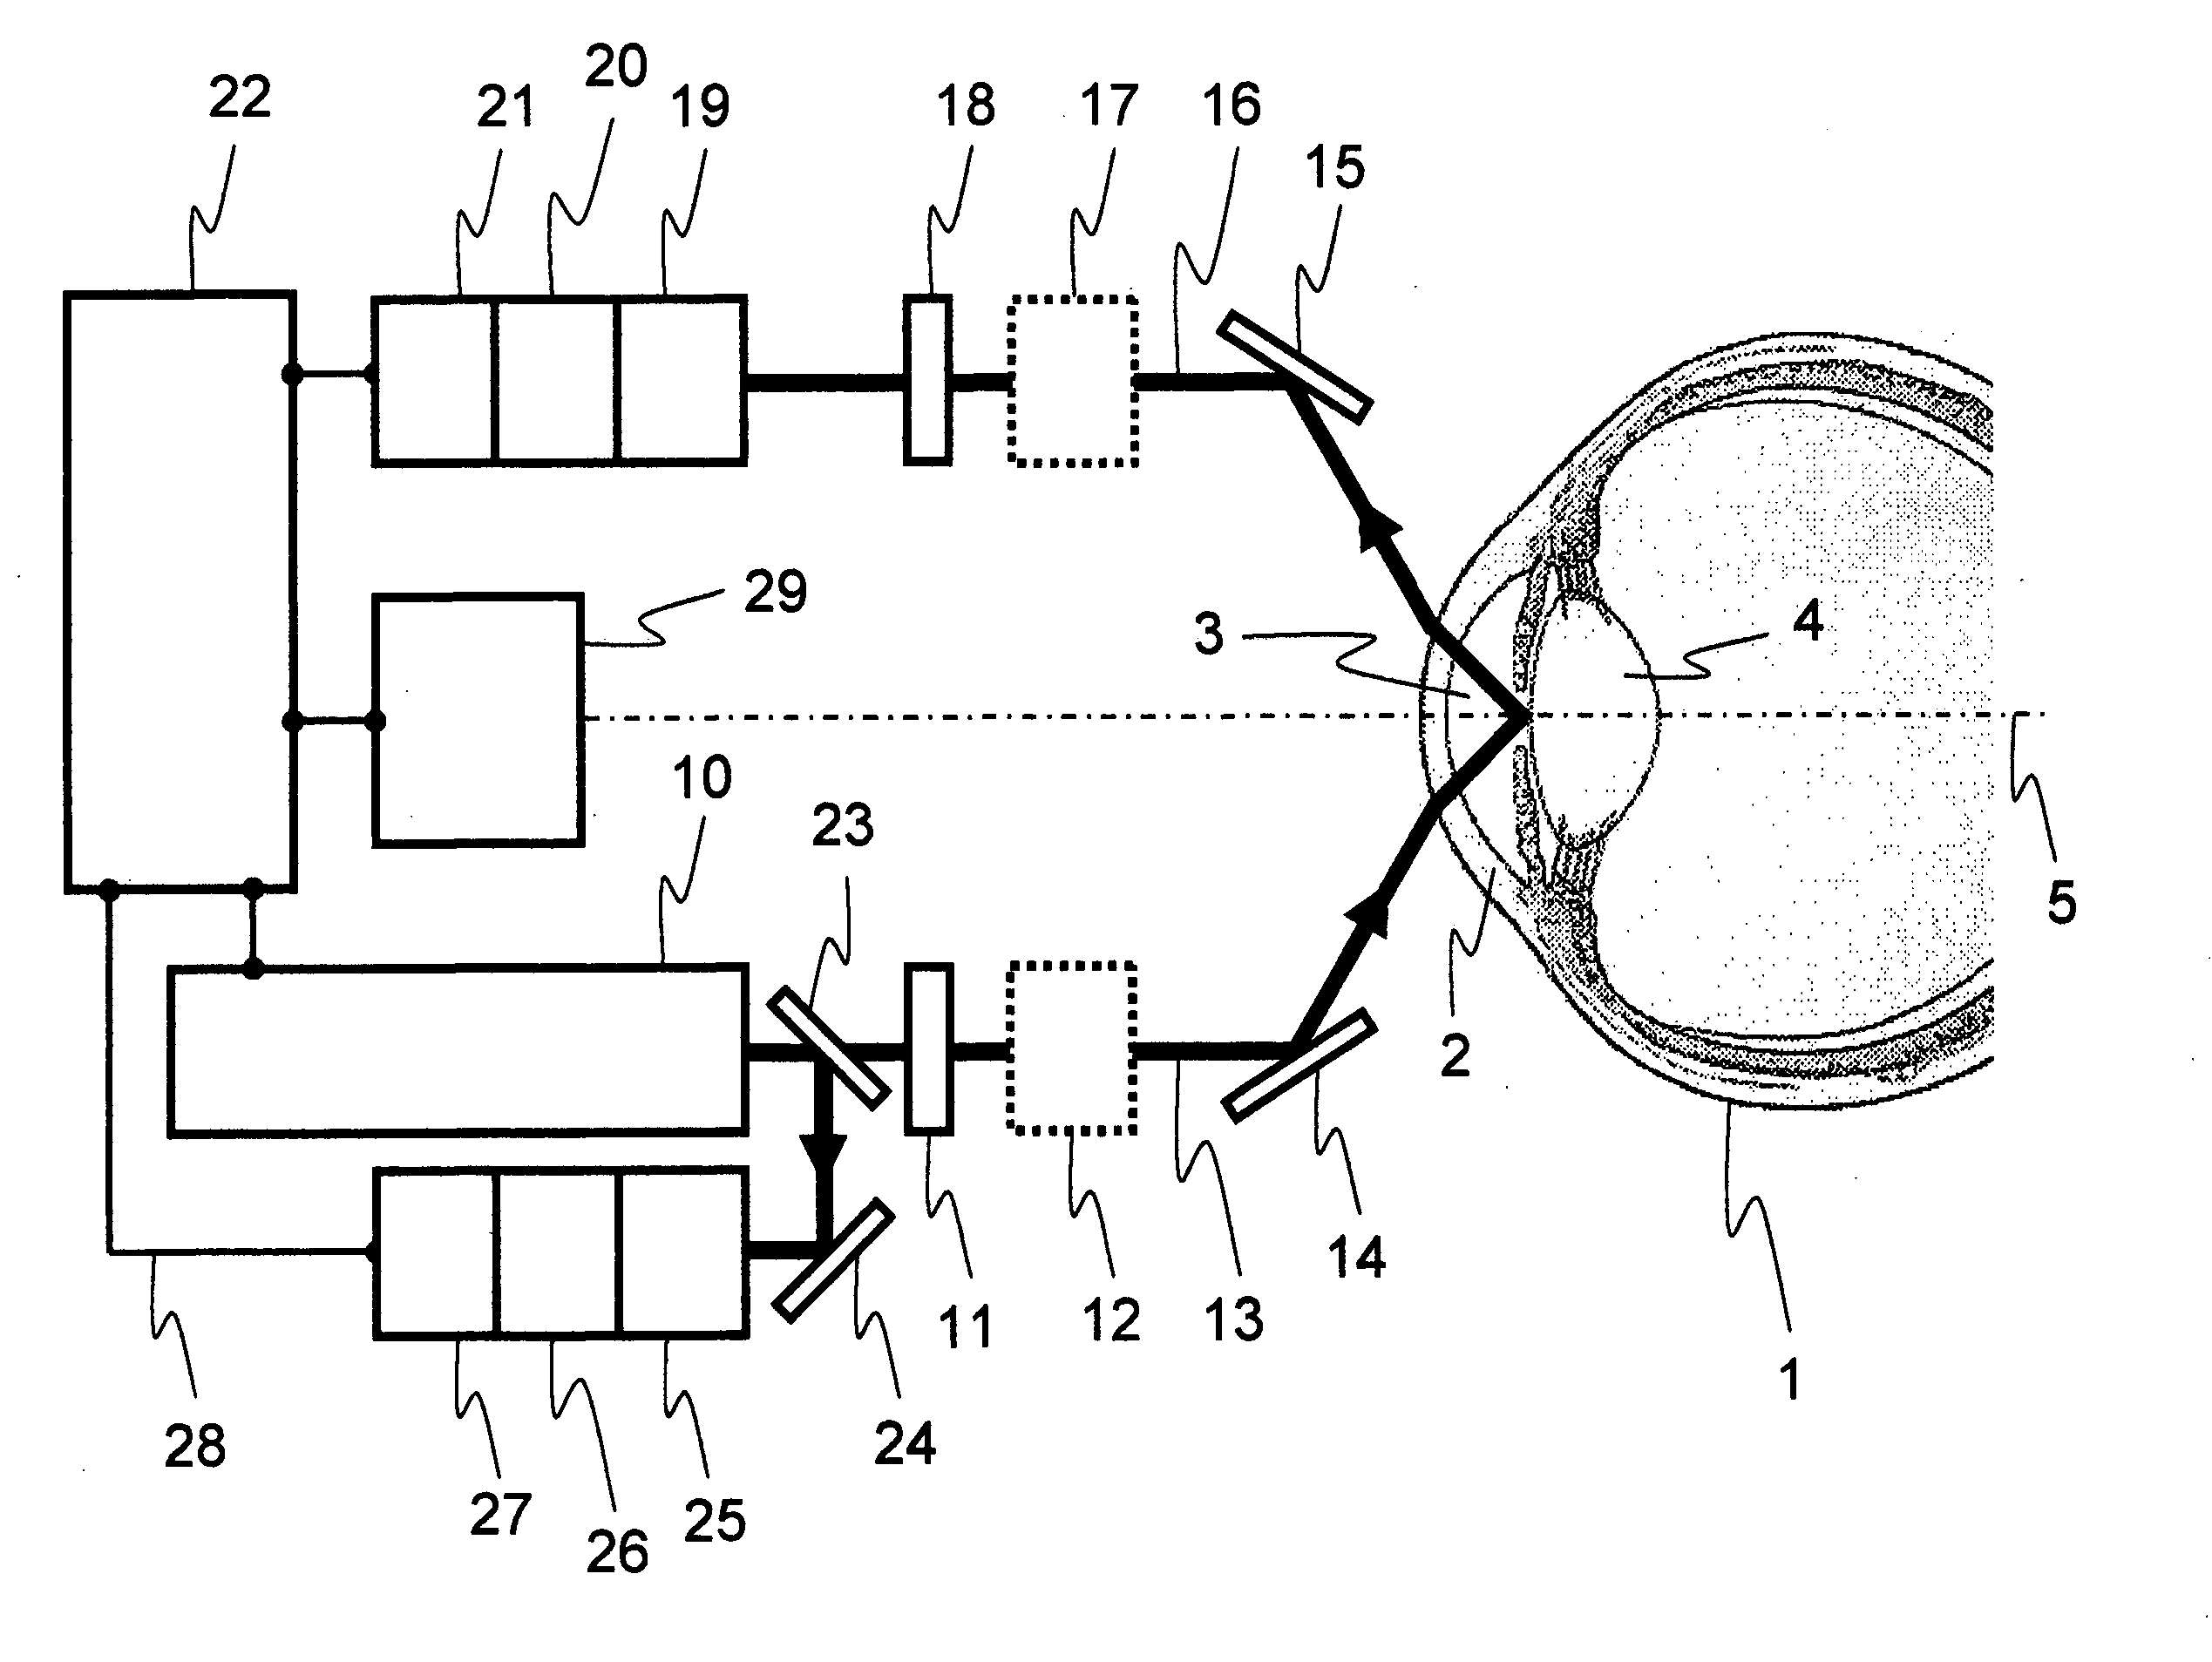 Method and device for measuring dissolved substances in human or animal intraocular fluid